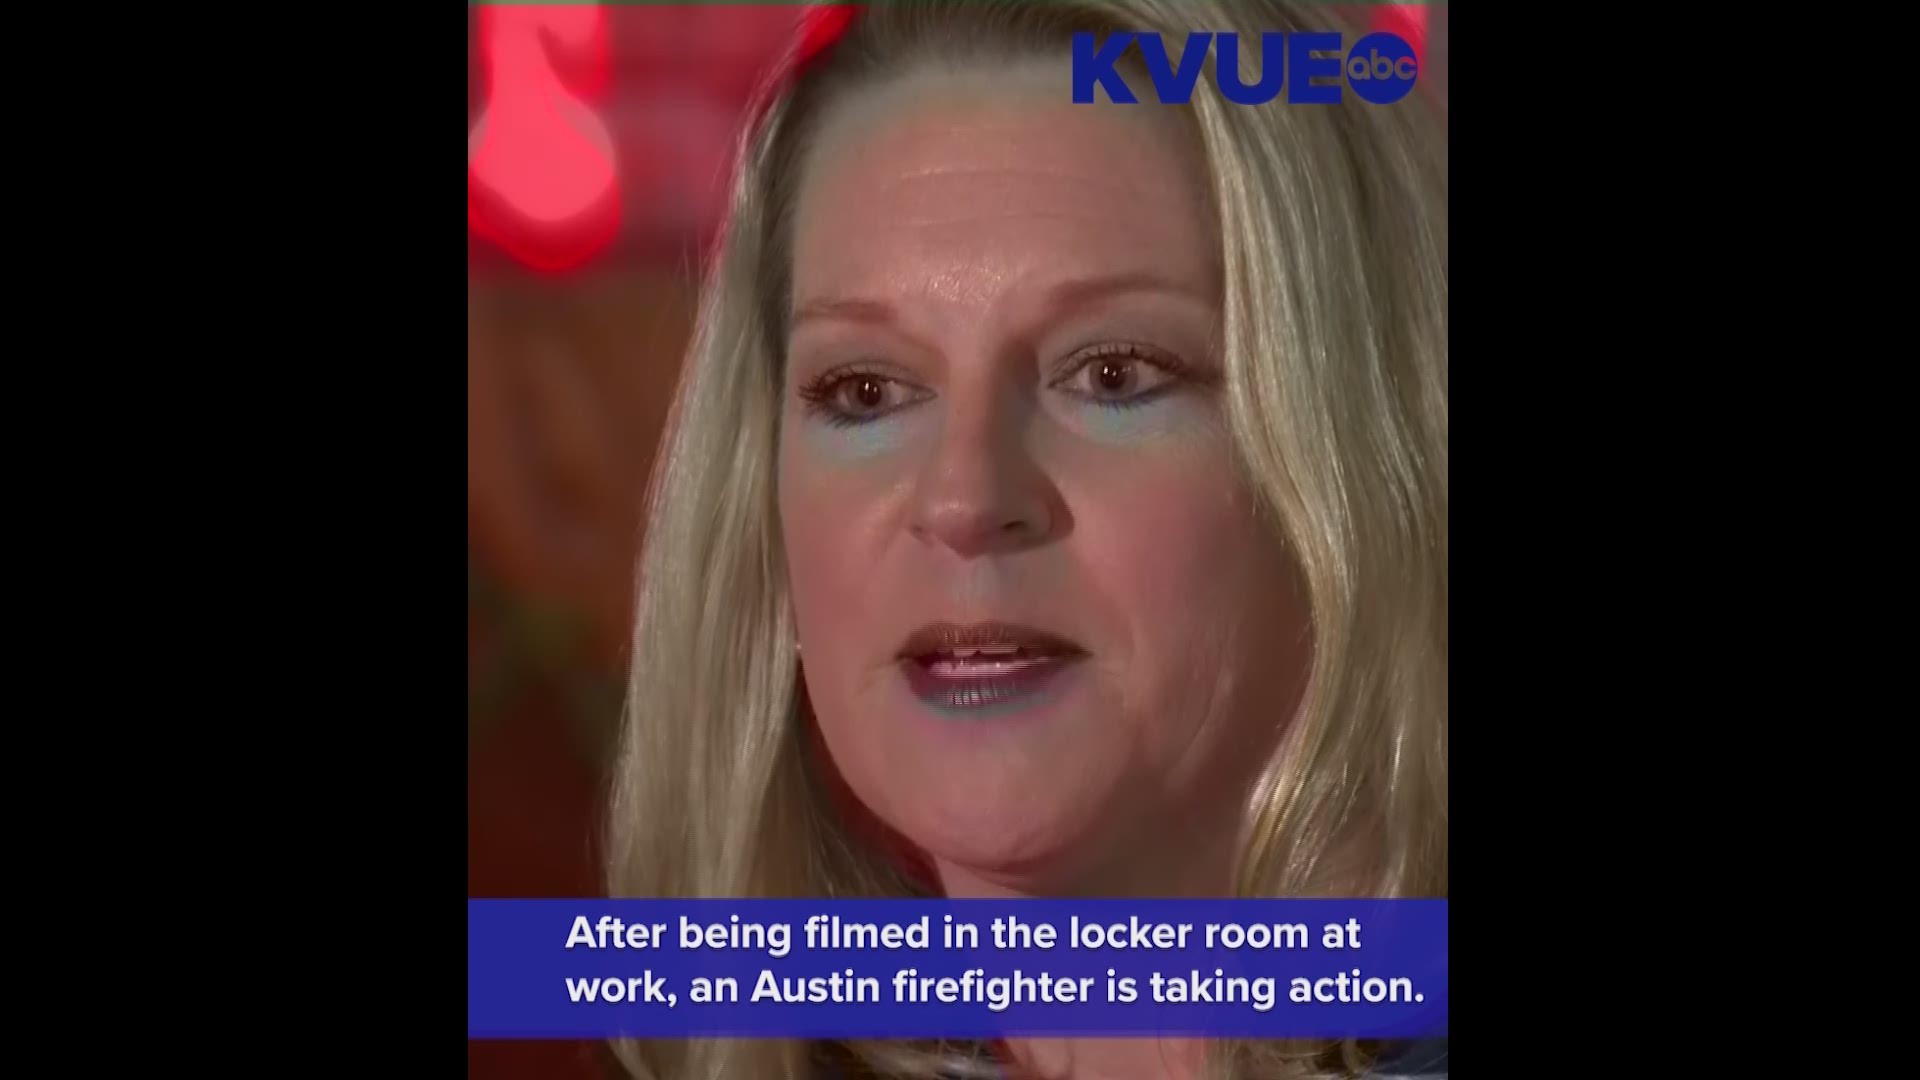 After an invasive visual recording case, Austin firefighter Kelly is seeking to expose a criminal justice system she says failed her.